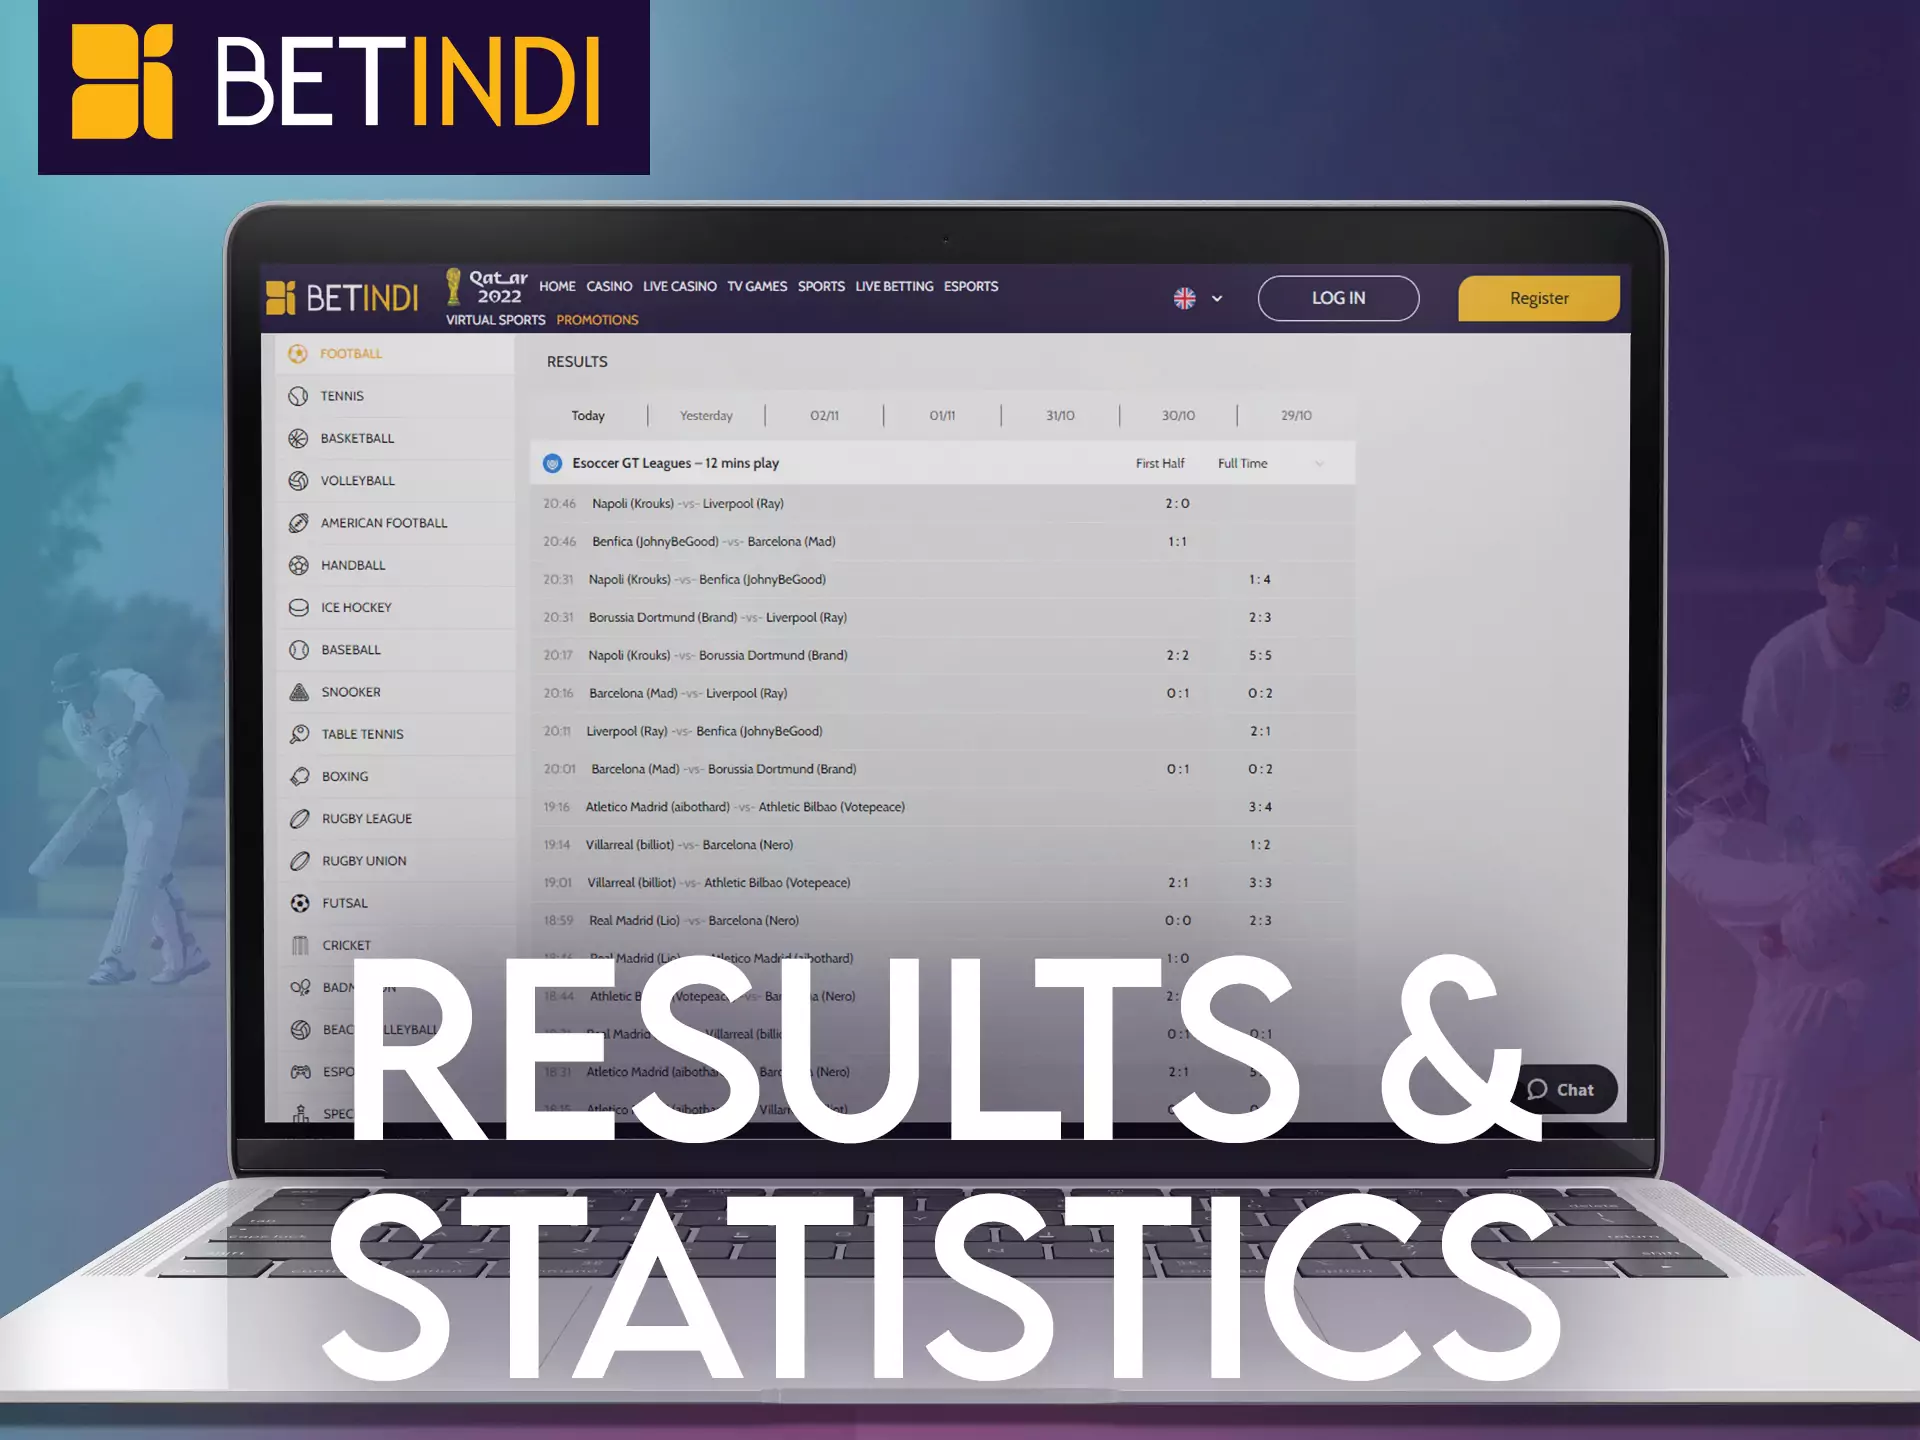 Track the results and statistics on Betindi, predict your bets.